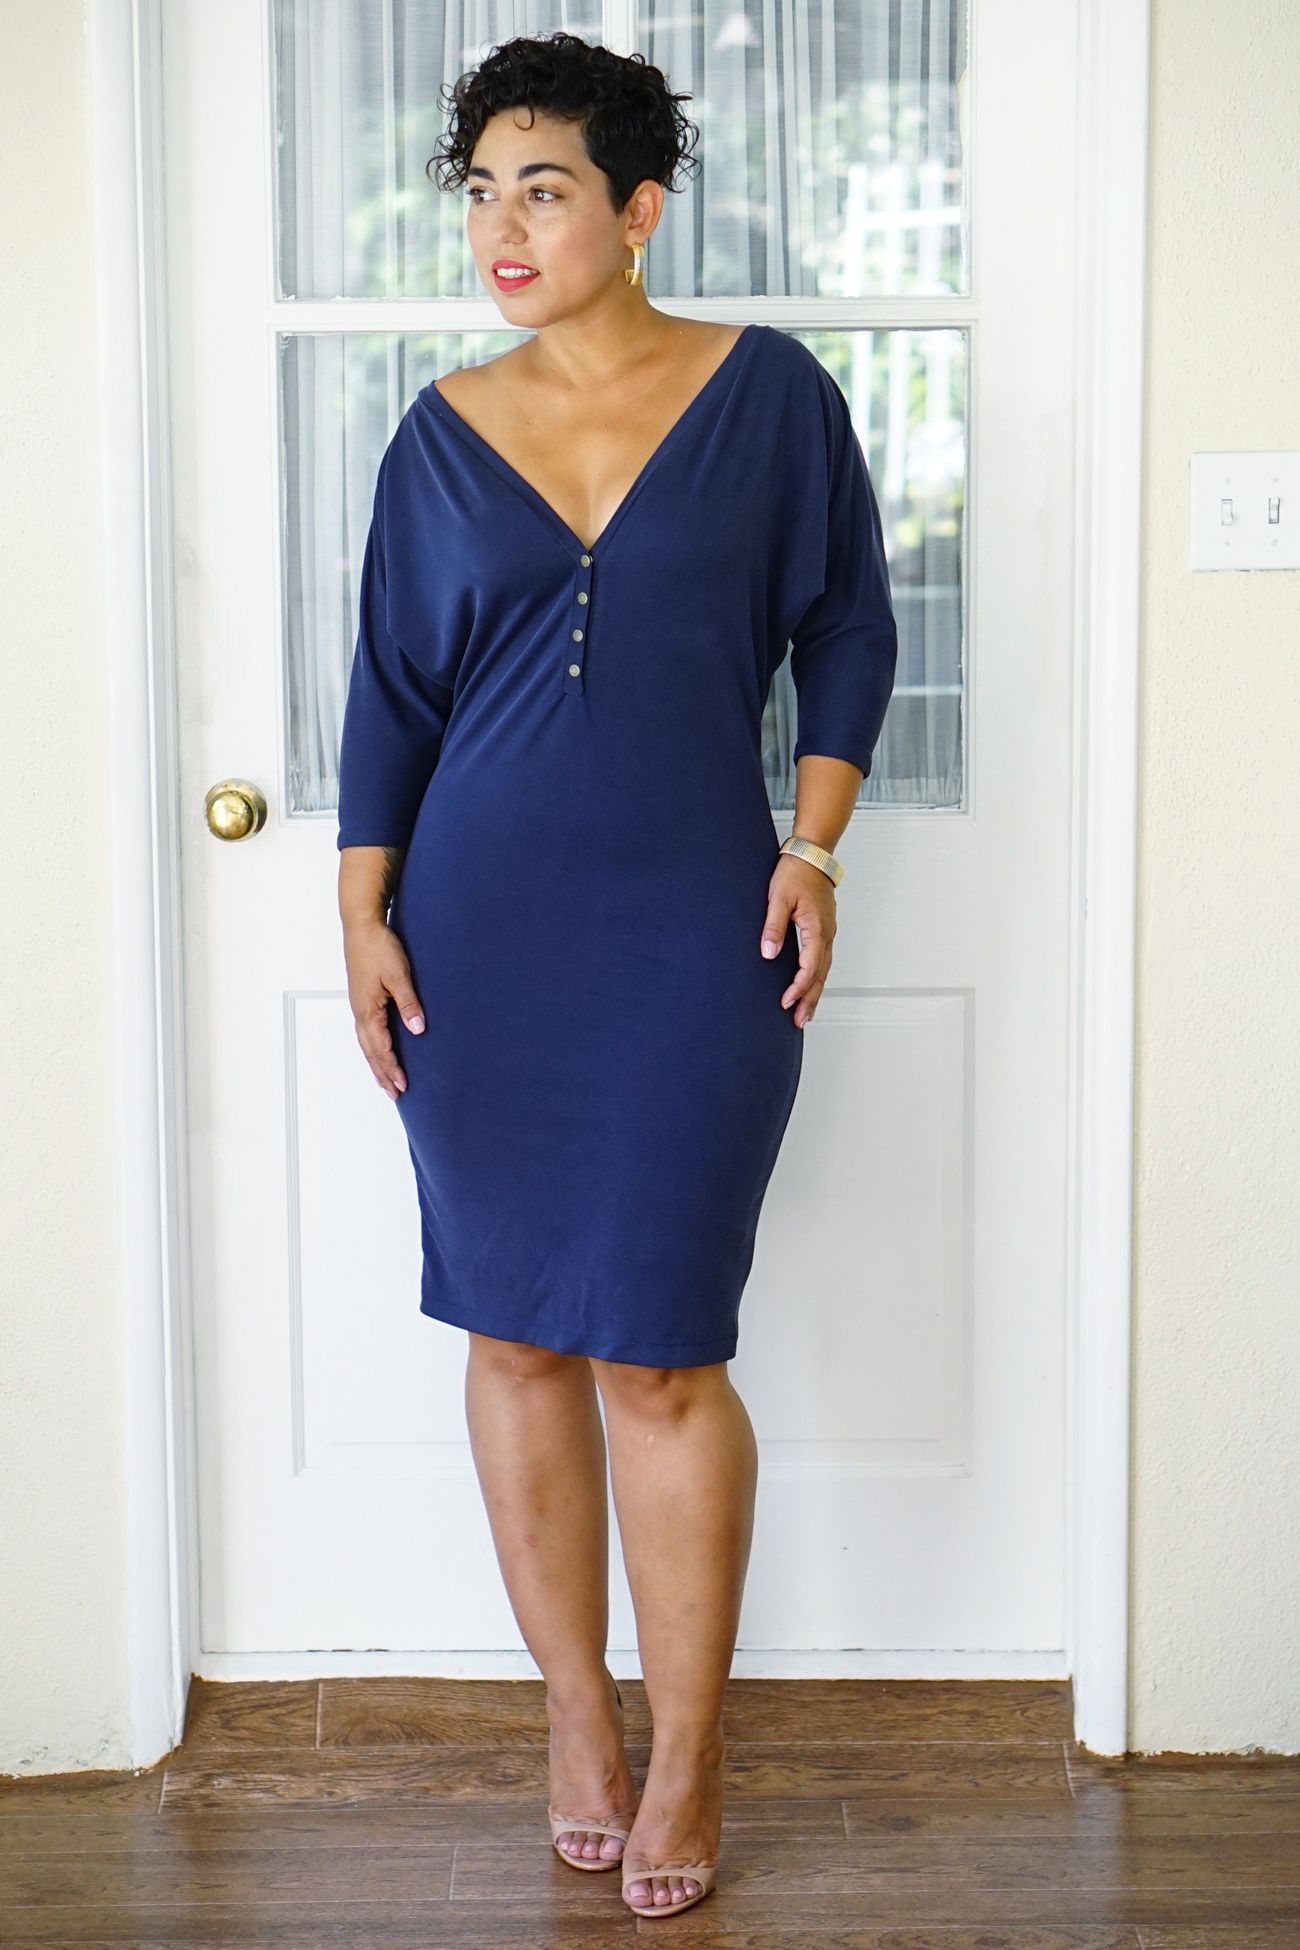 How To Style Batwing Dress